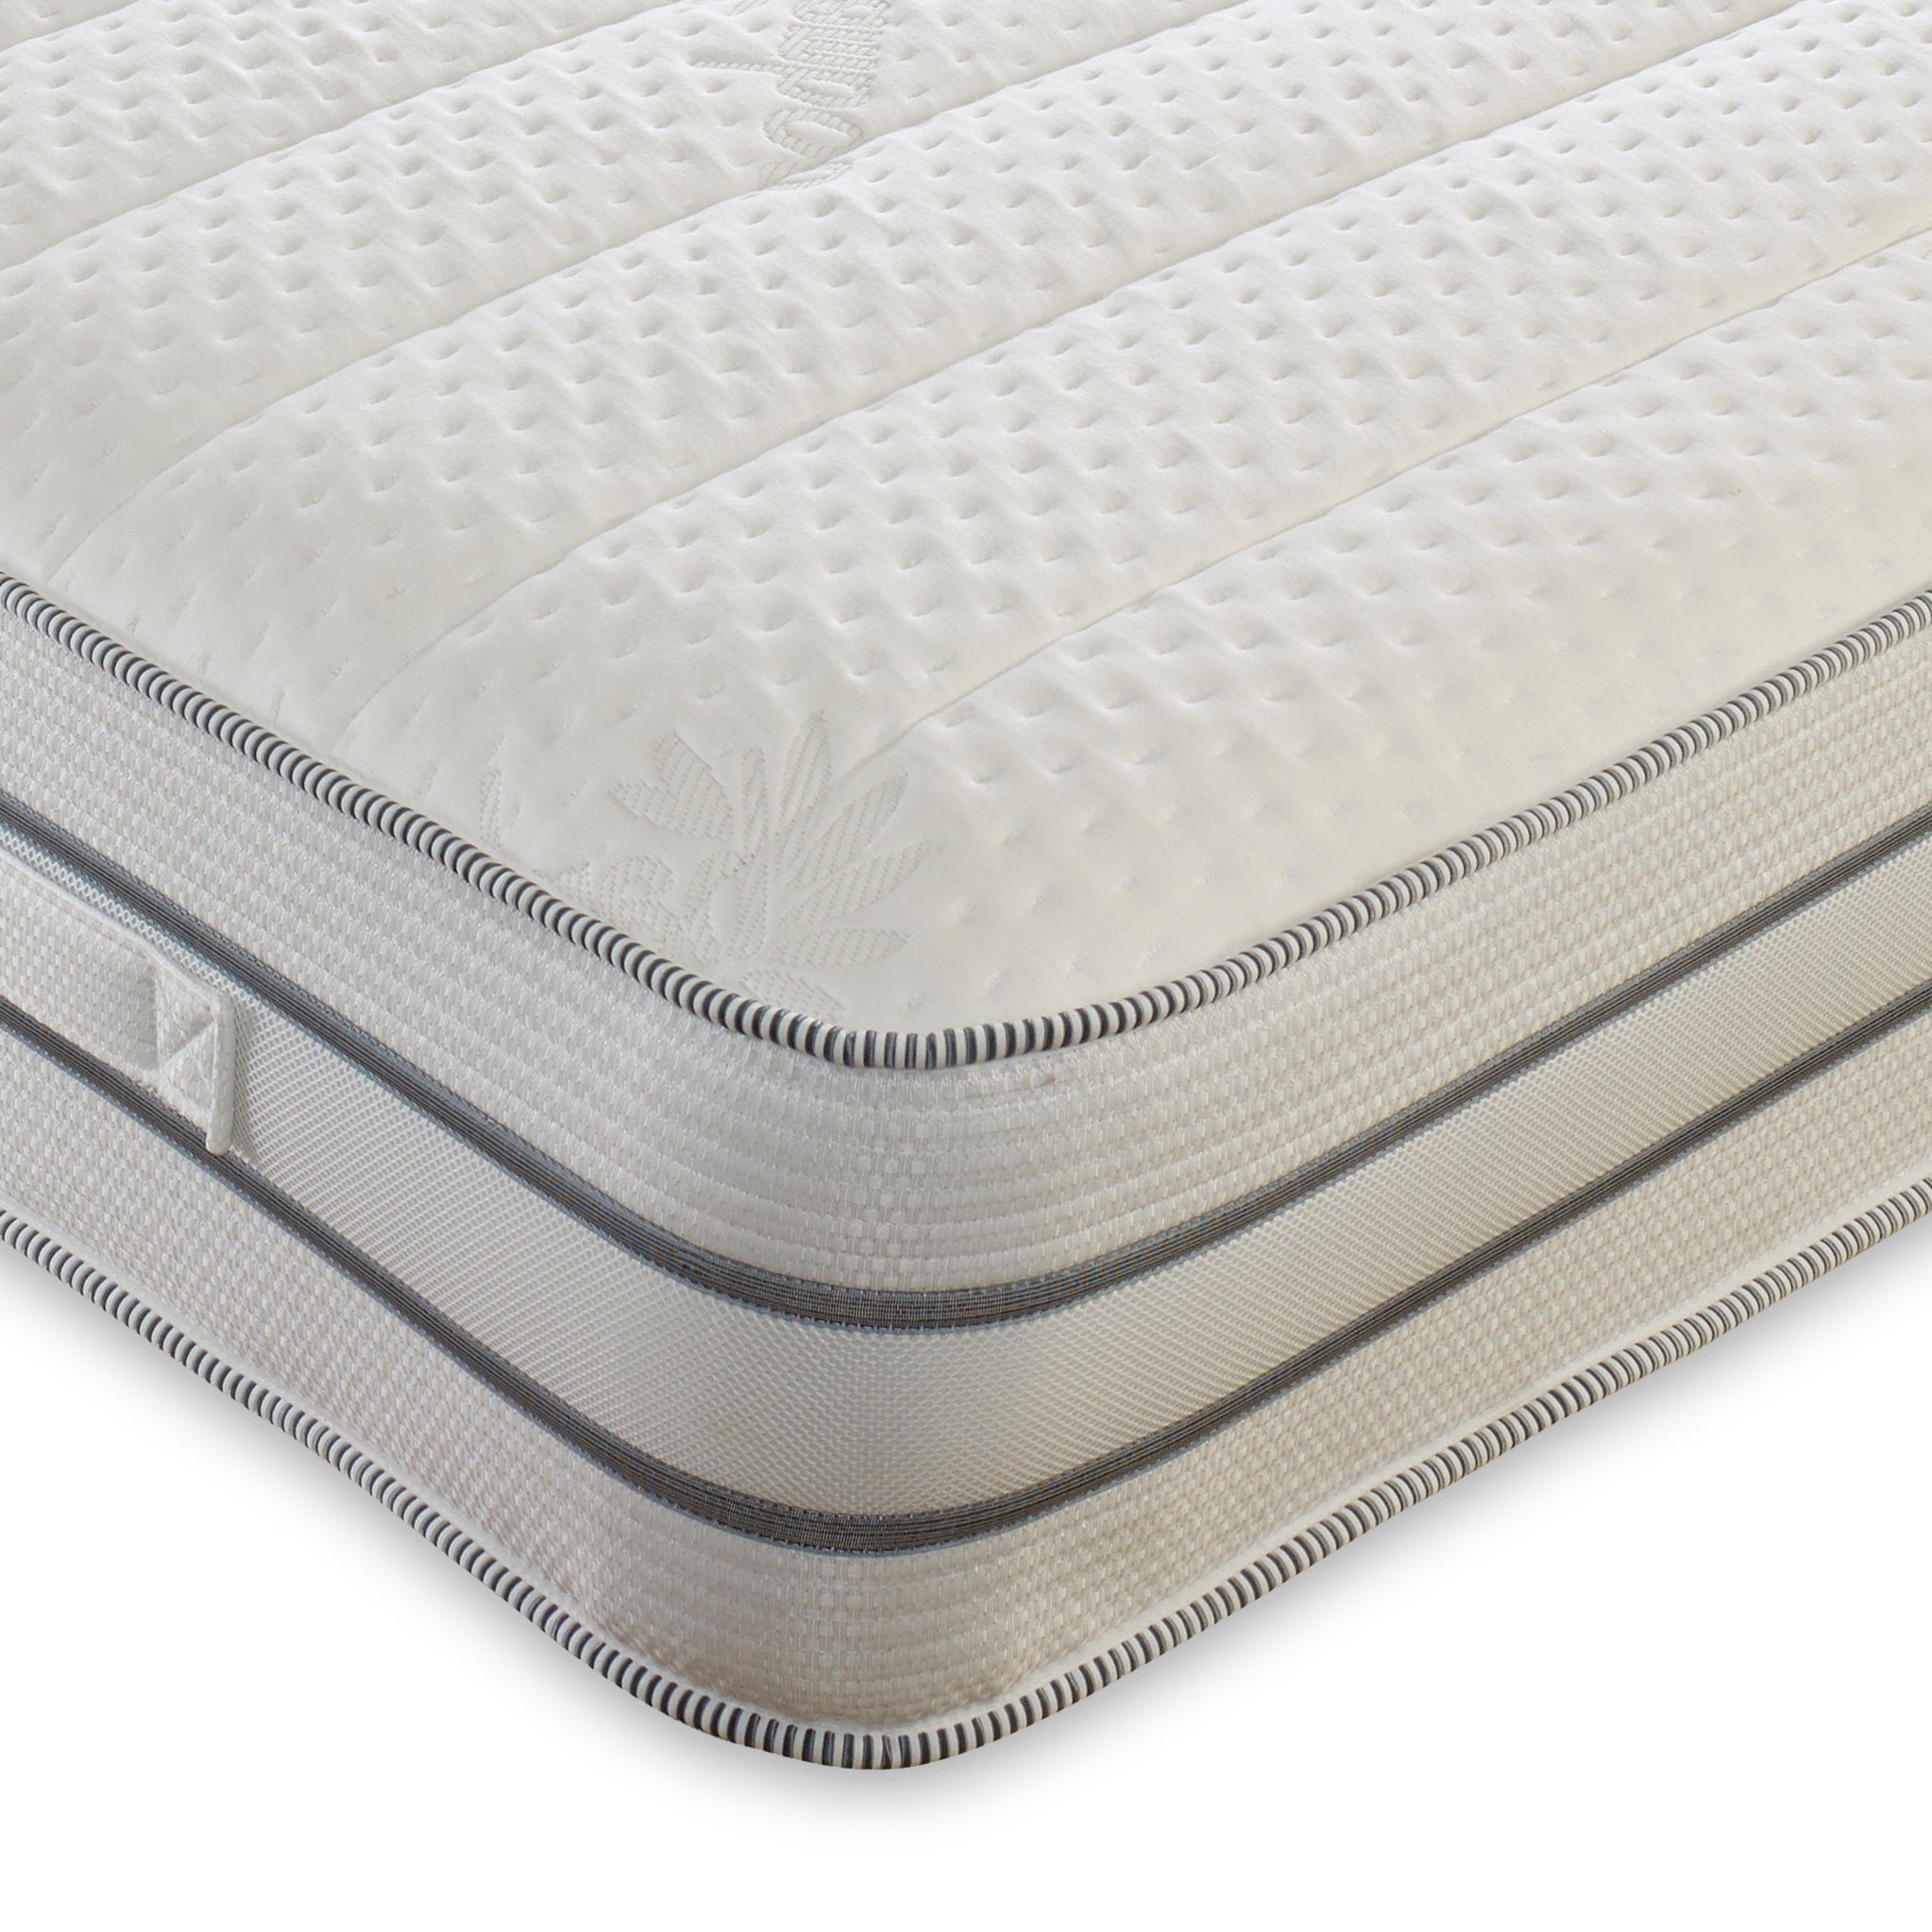 Simply Support 1000 Spring Mattress Single Double King Super King